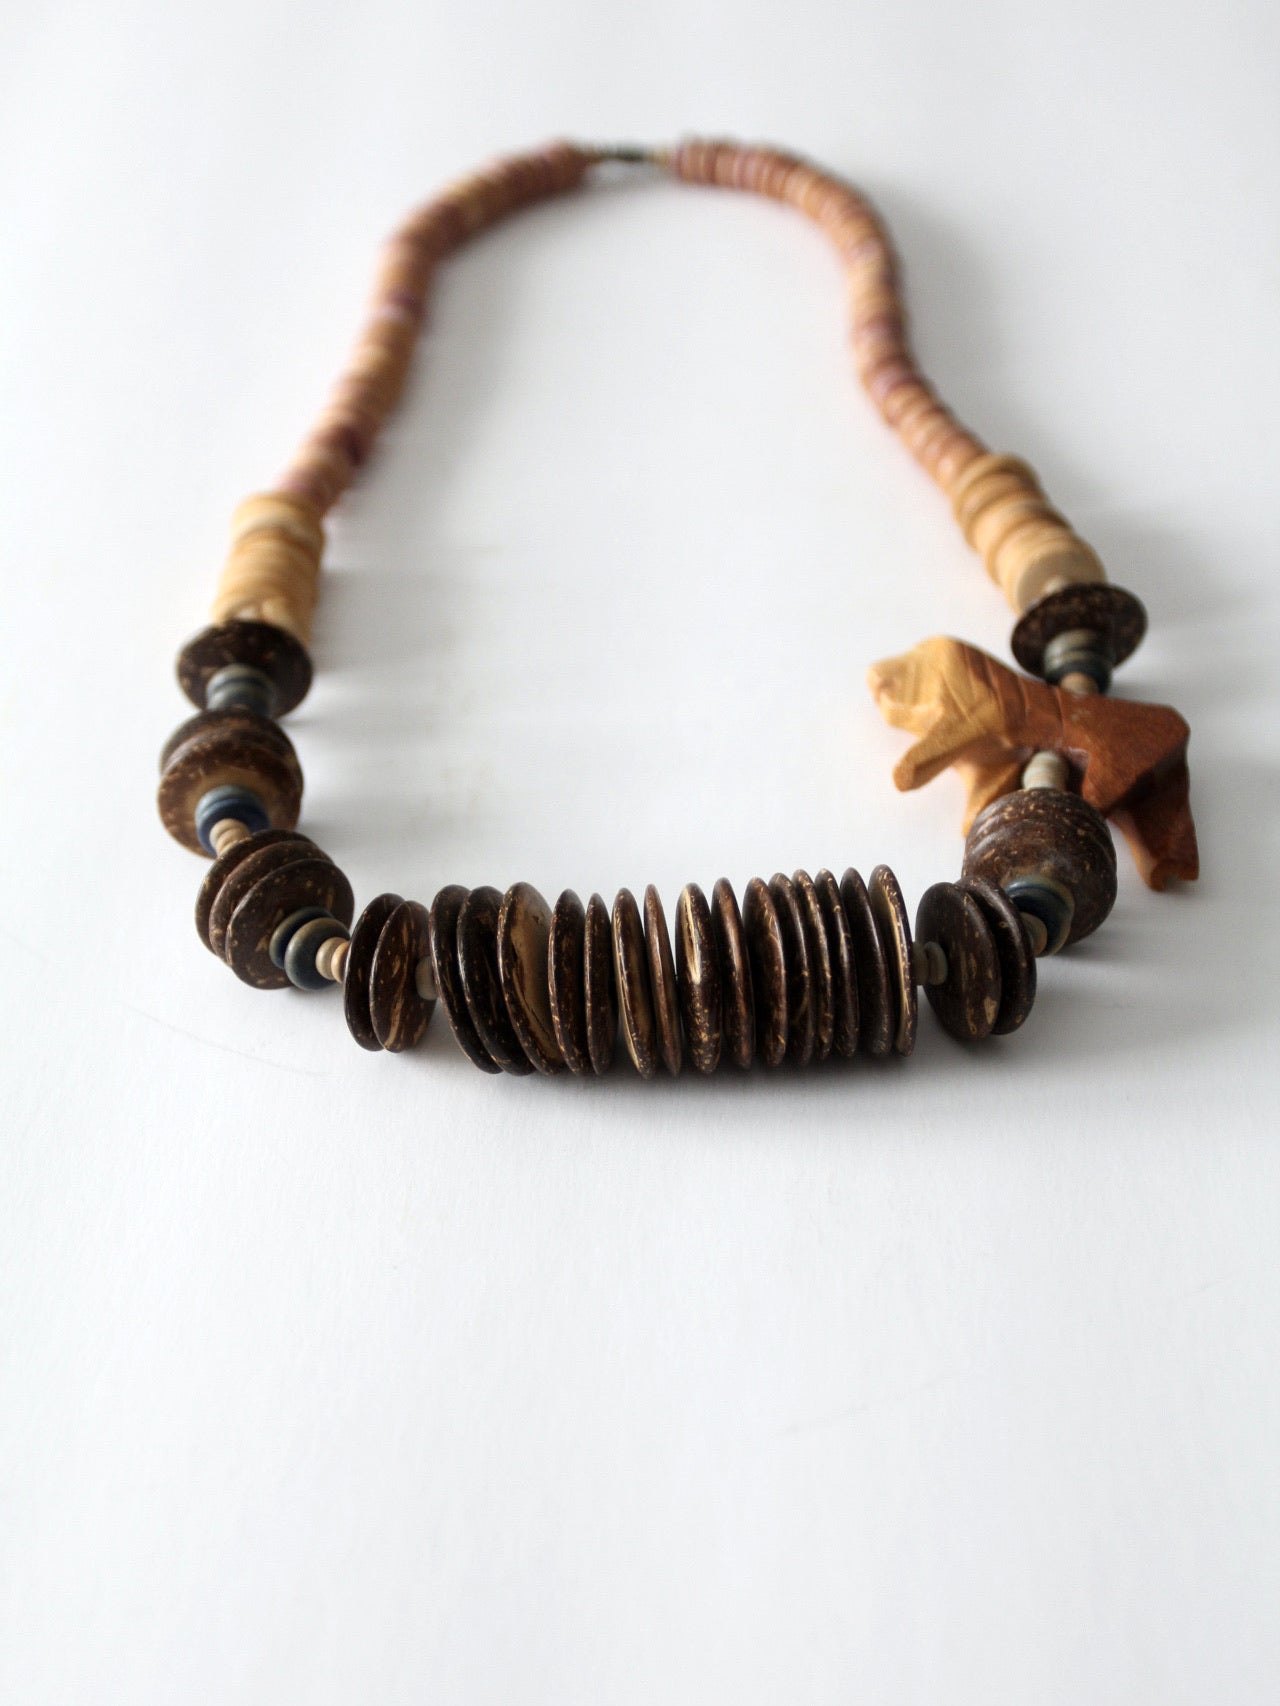 Vintage wooden bead necklace Nepal style pendant | Nepsera Collection